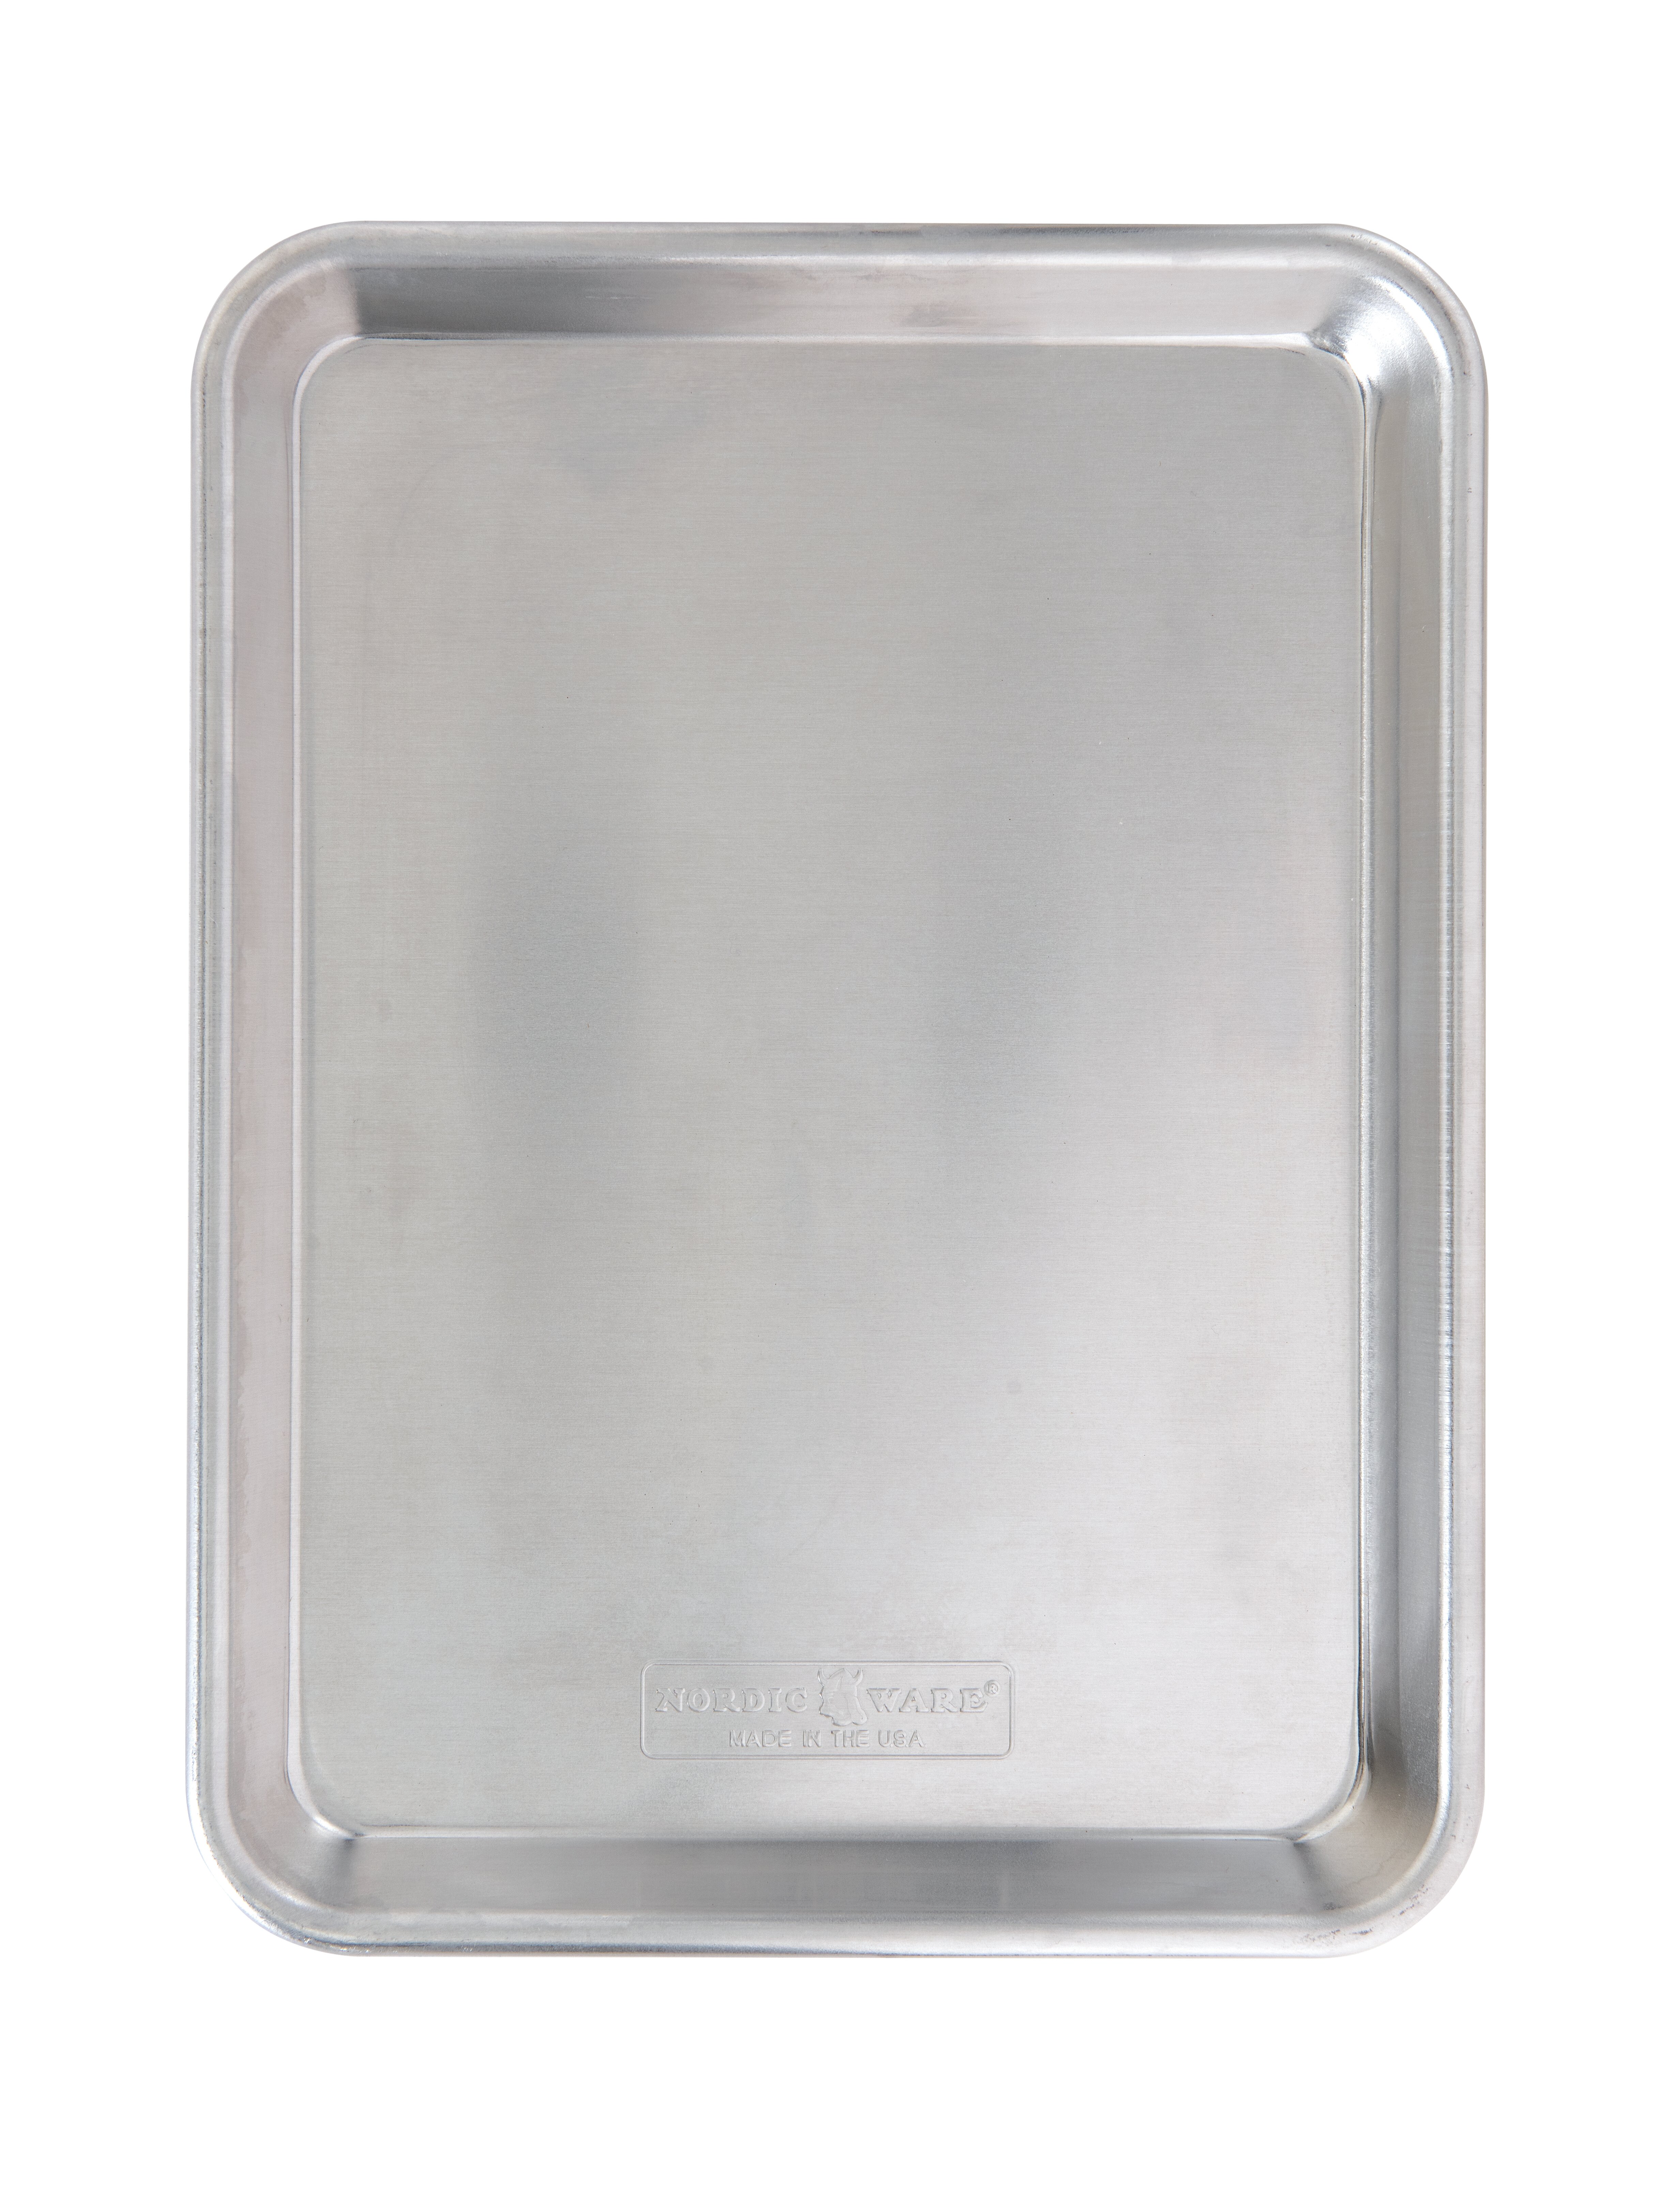  Nordic Ware Eighth Sheet Burger Serving Tray Set, 2 Piece: Home  & Kitchen